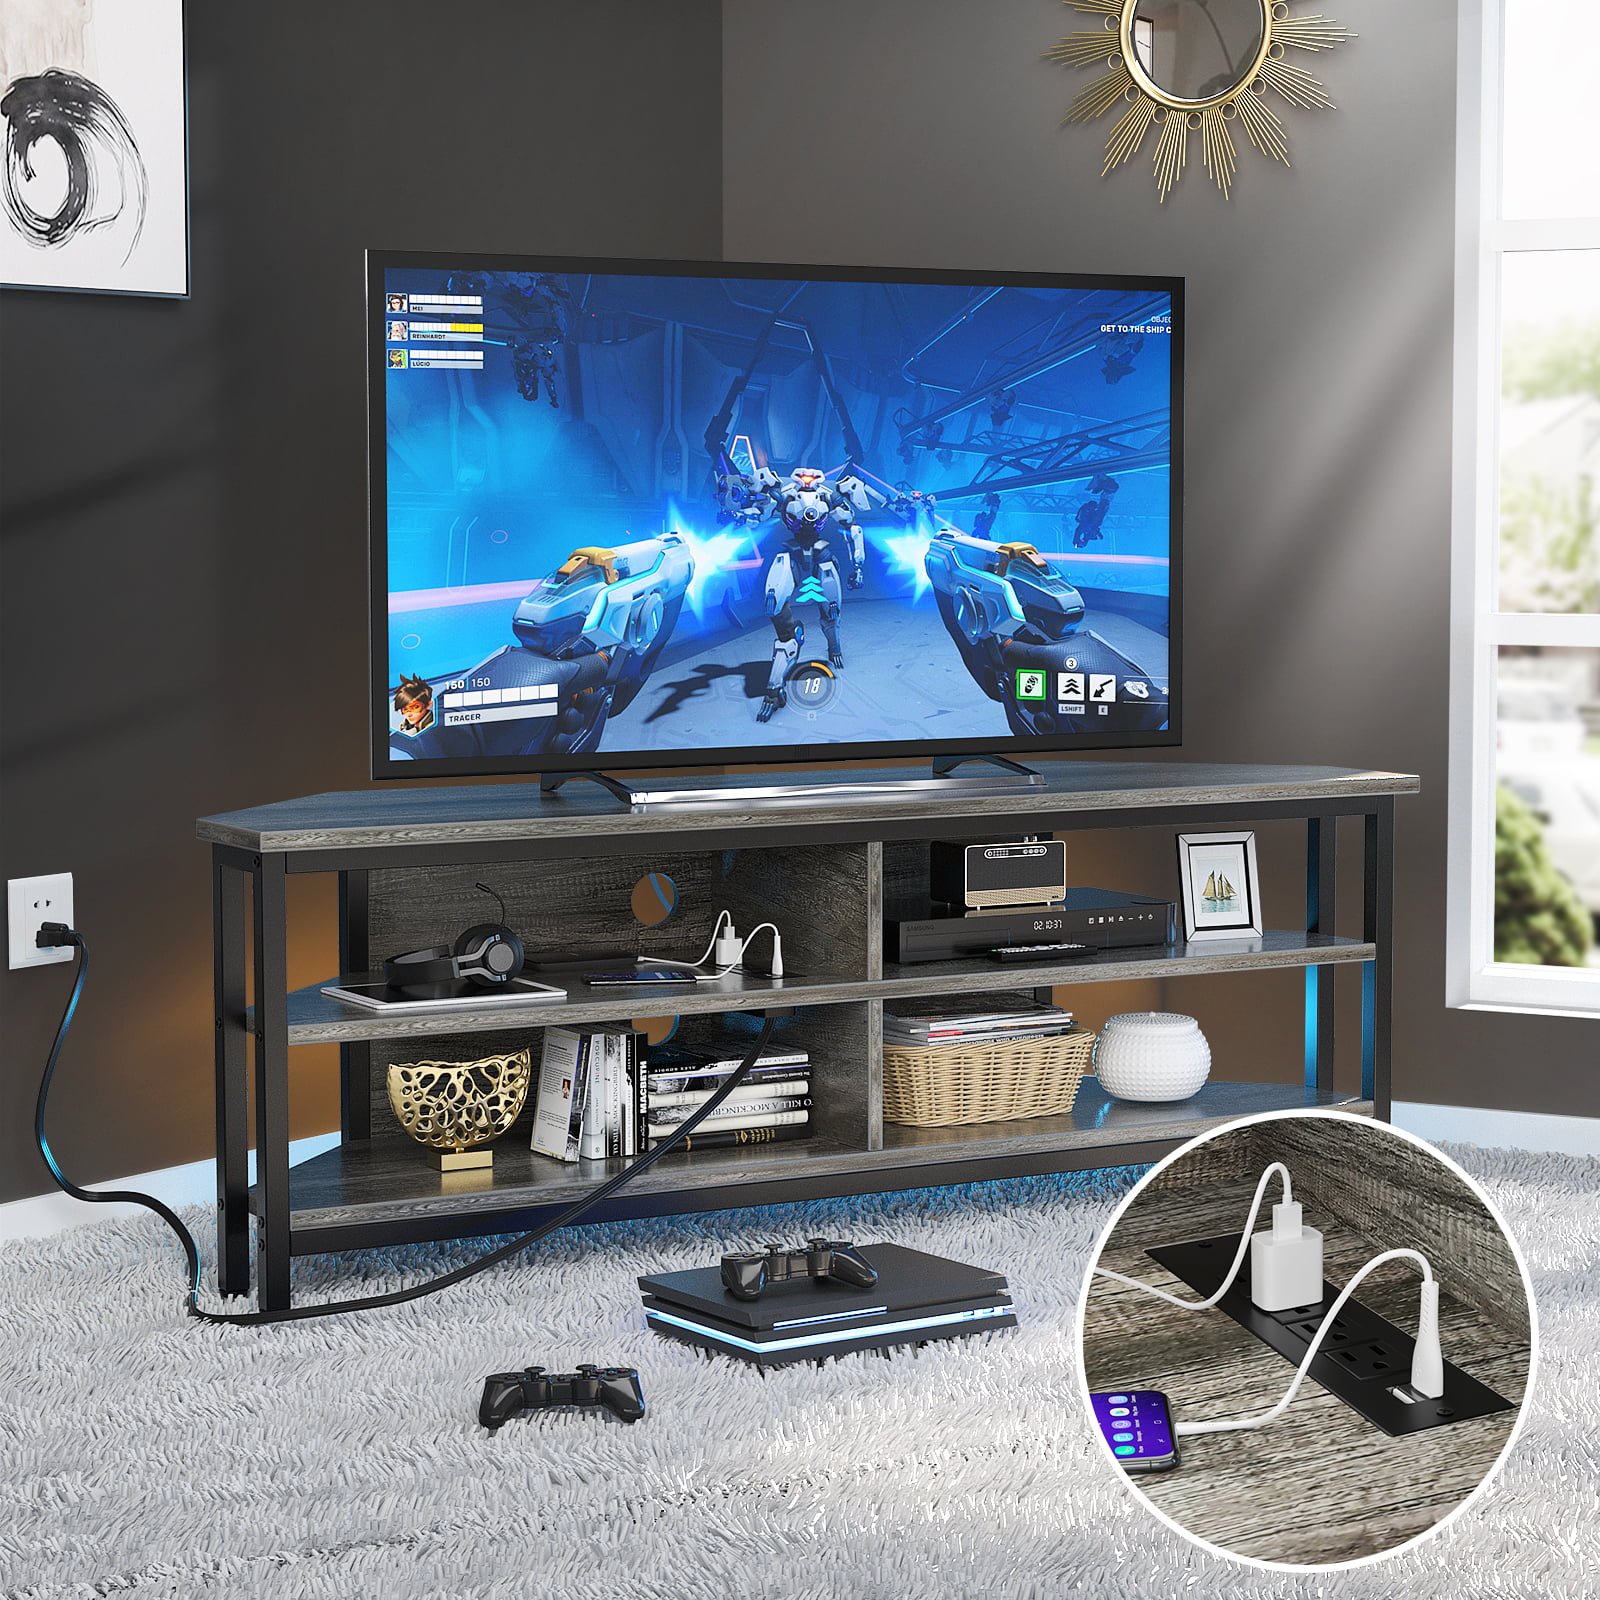 SANYOAC Black Stand for 55/60/65/70/75+ Inch Led TV, Modern Entertainment  Center with Storage and Shelves for Video Gaming, Living Room Bedroom